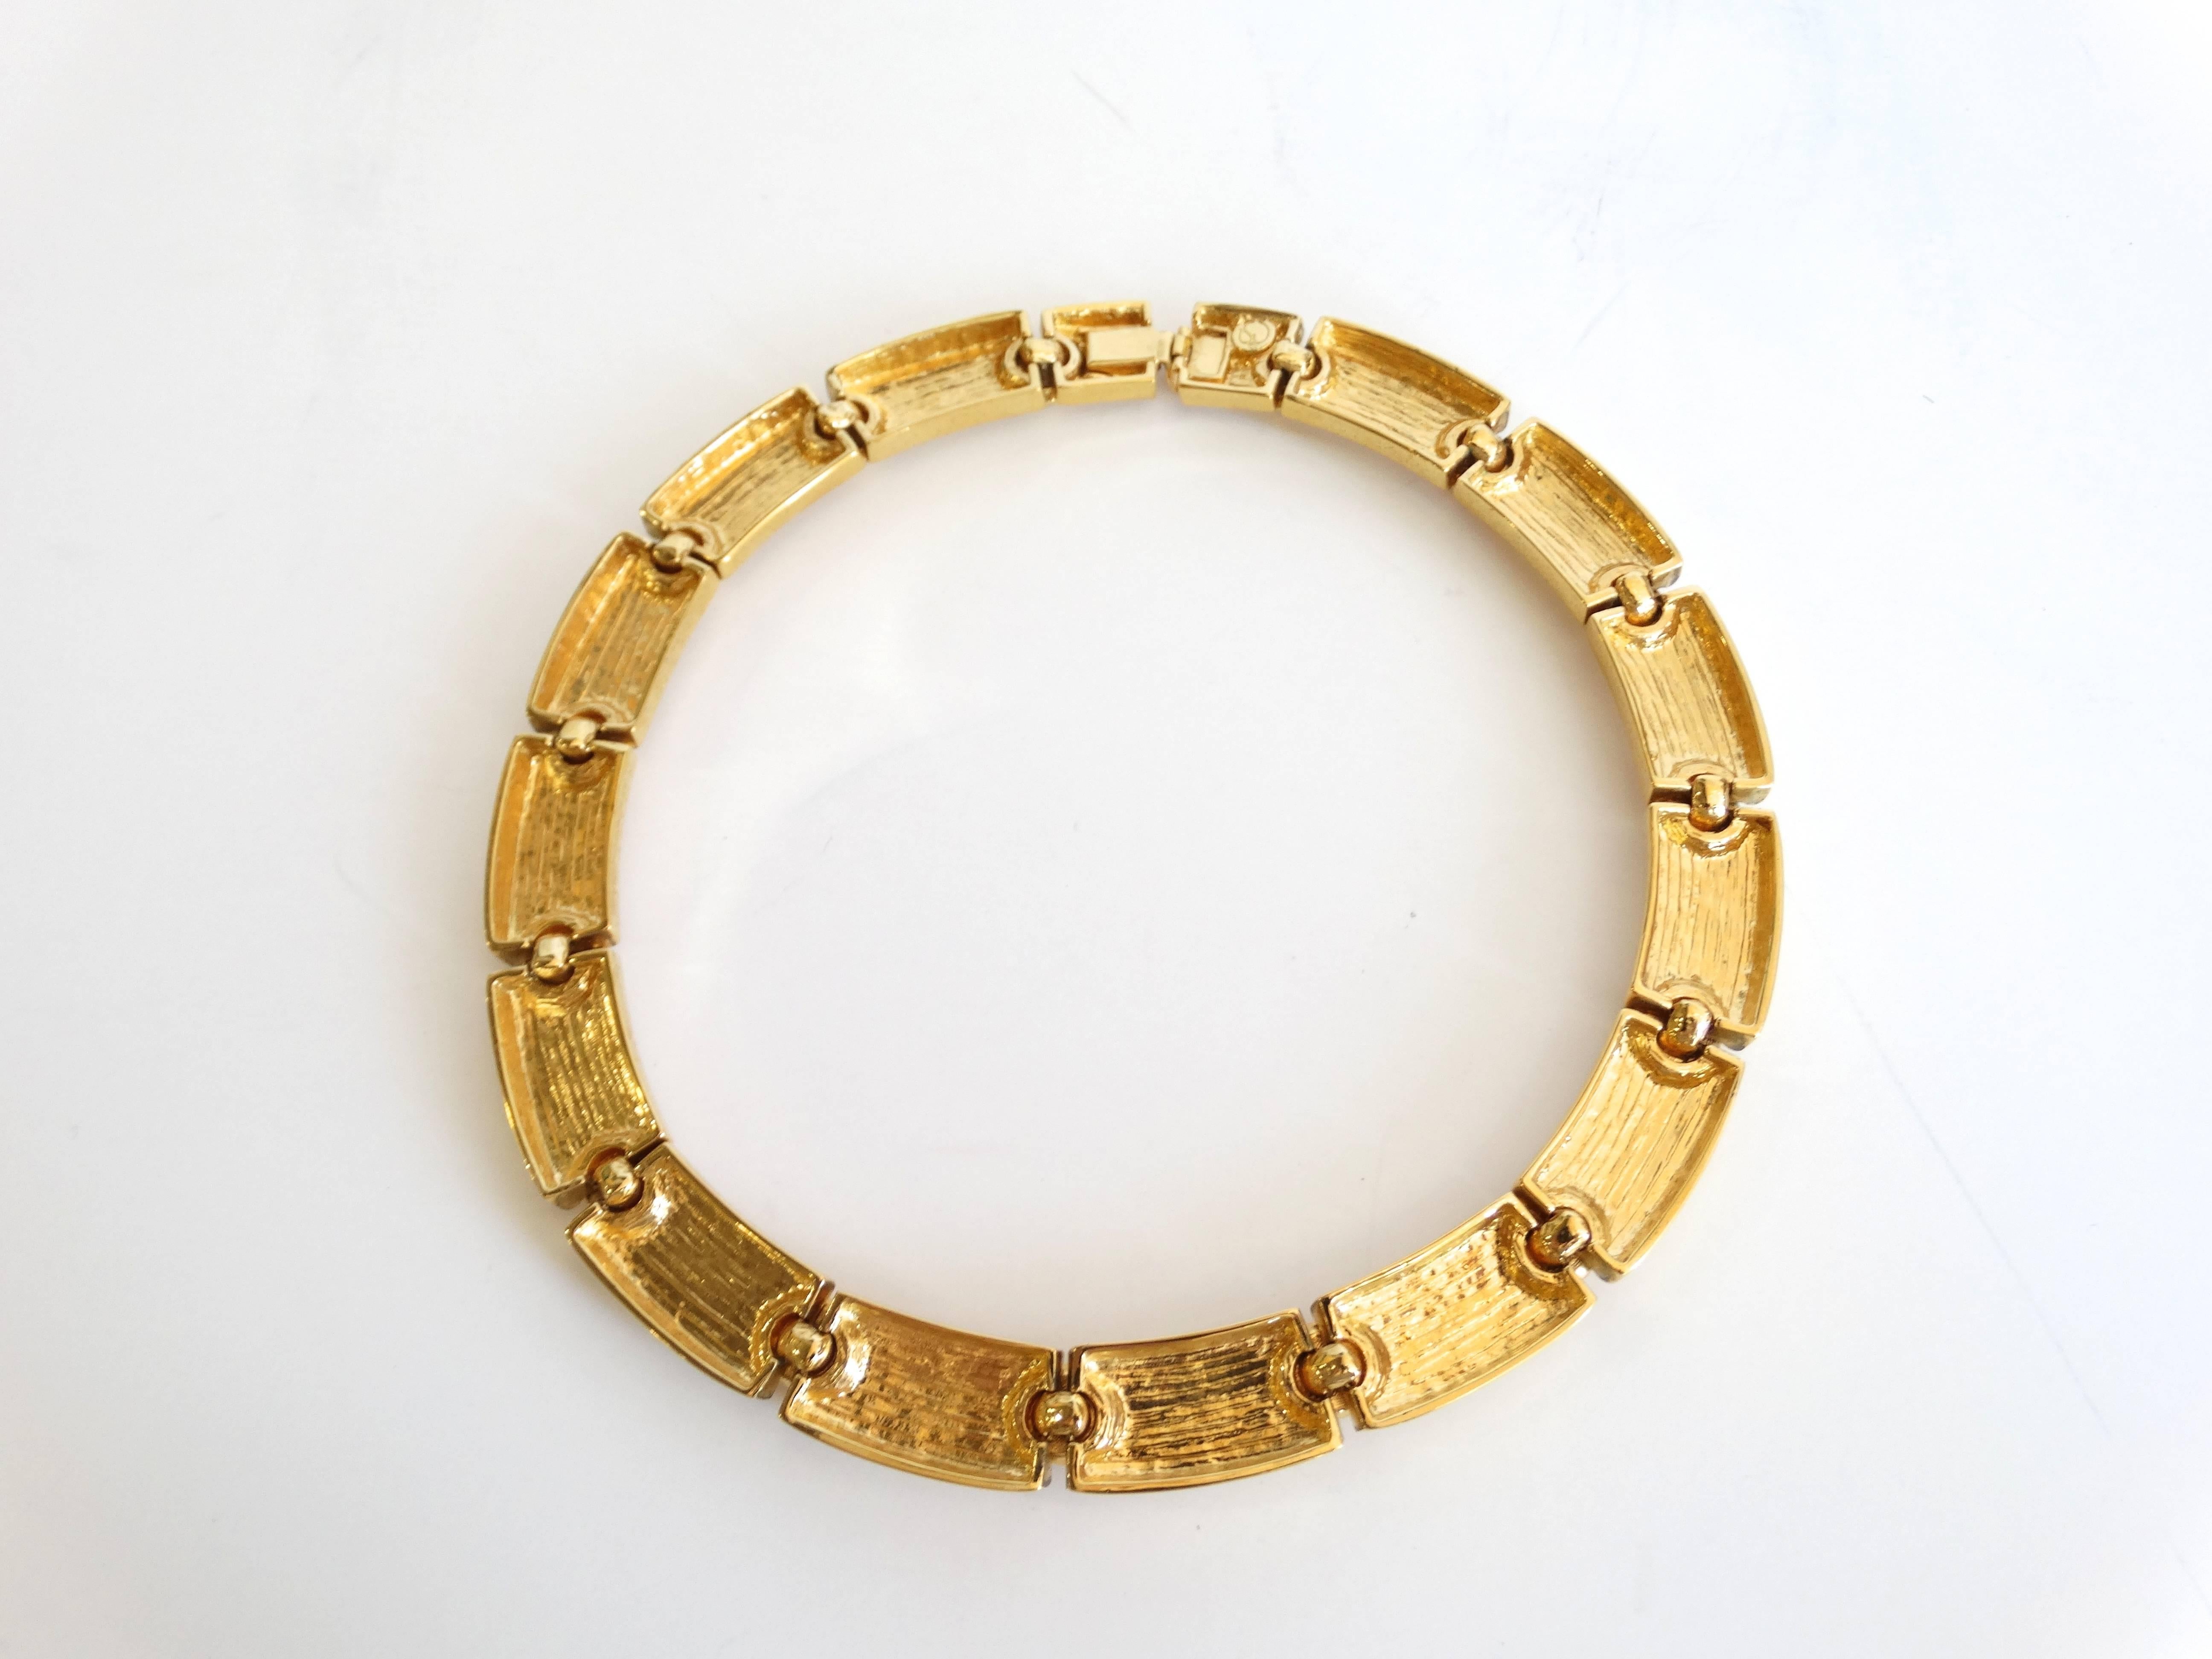 1980s St. John link collar necklace in gold! Chunky chain design with screw-like motifs, reminiscent of Cartier love jewelry. Box clasp closure. Signed with
St.Johns watermark. 16